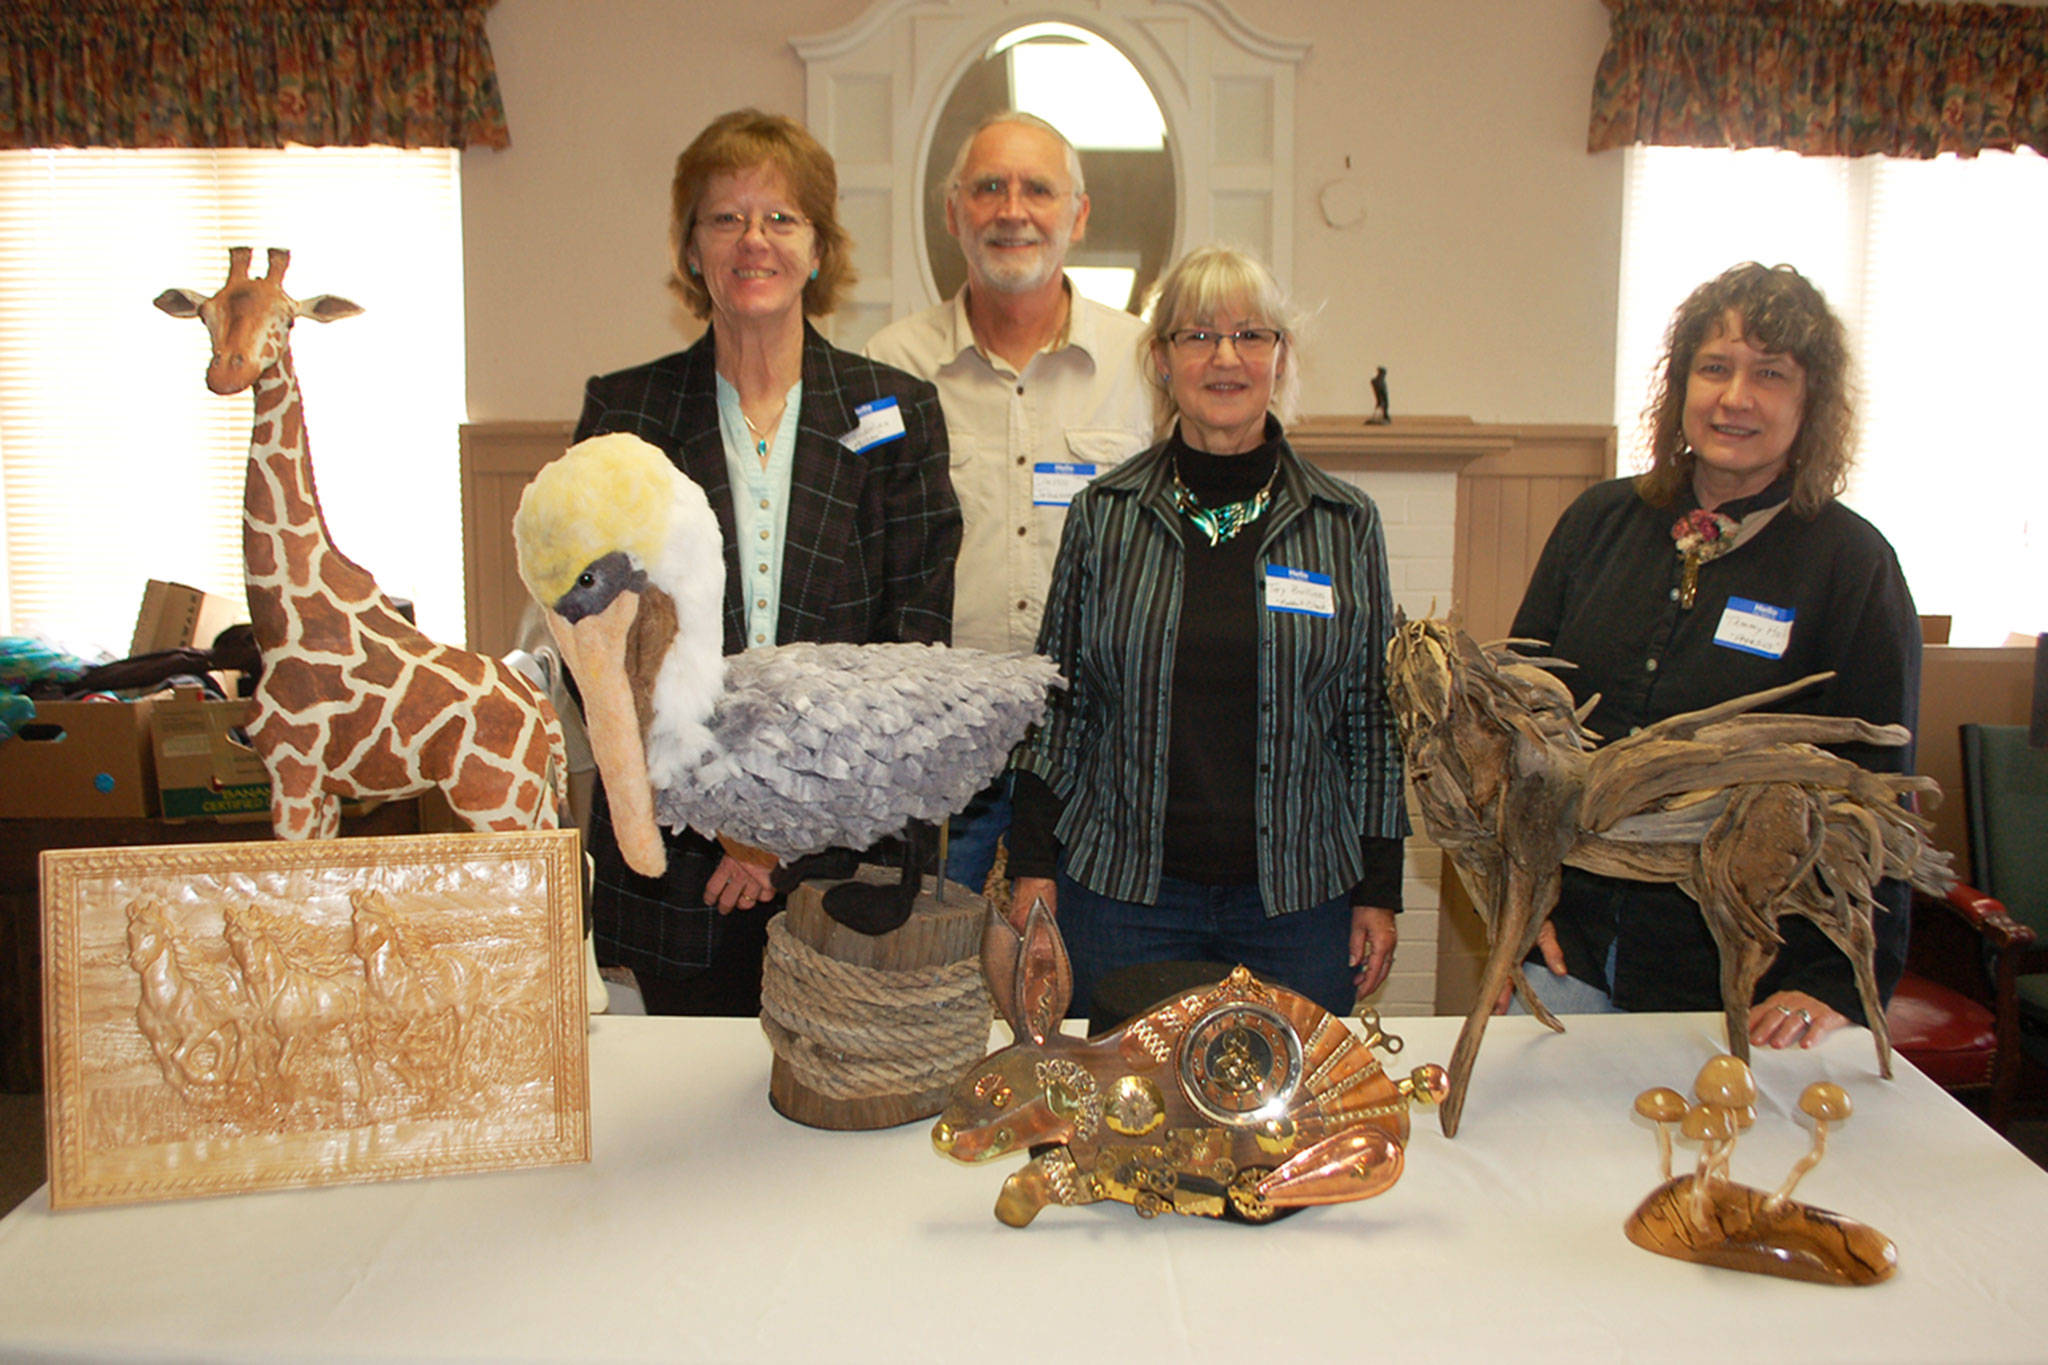 Olympic Theatre Arts sets the stage for “Heart for the Arts” an annual fundraiser that promotes a variety of artists in the Sequim community. A few of the live auction contributing artists, from left, are Terri Biondolino with “Hank”a pelican sculpture of felt fiber, David Johannessohn, Toy Buillon, with her and her husband Tim’s (not pictured) piece “Rabbit Clock” made from wood and random items, and Tammy Hall with her driftwood sculpture “Pegasus.” Sequim Gazette photo by Erin Hawkins